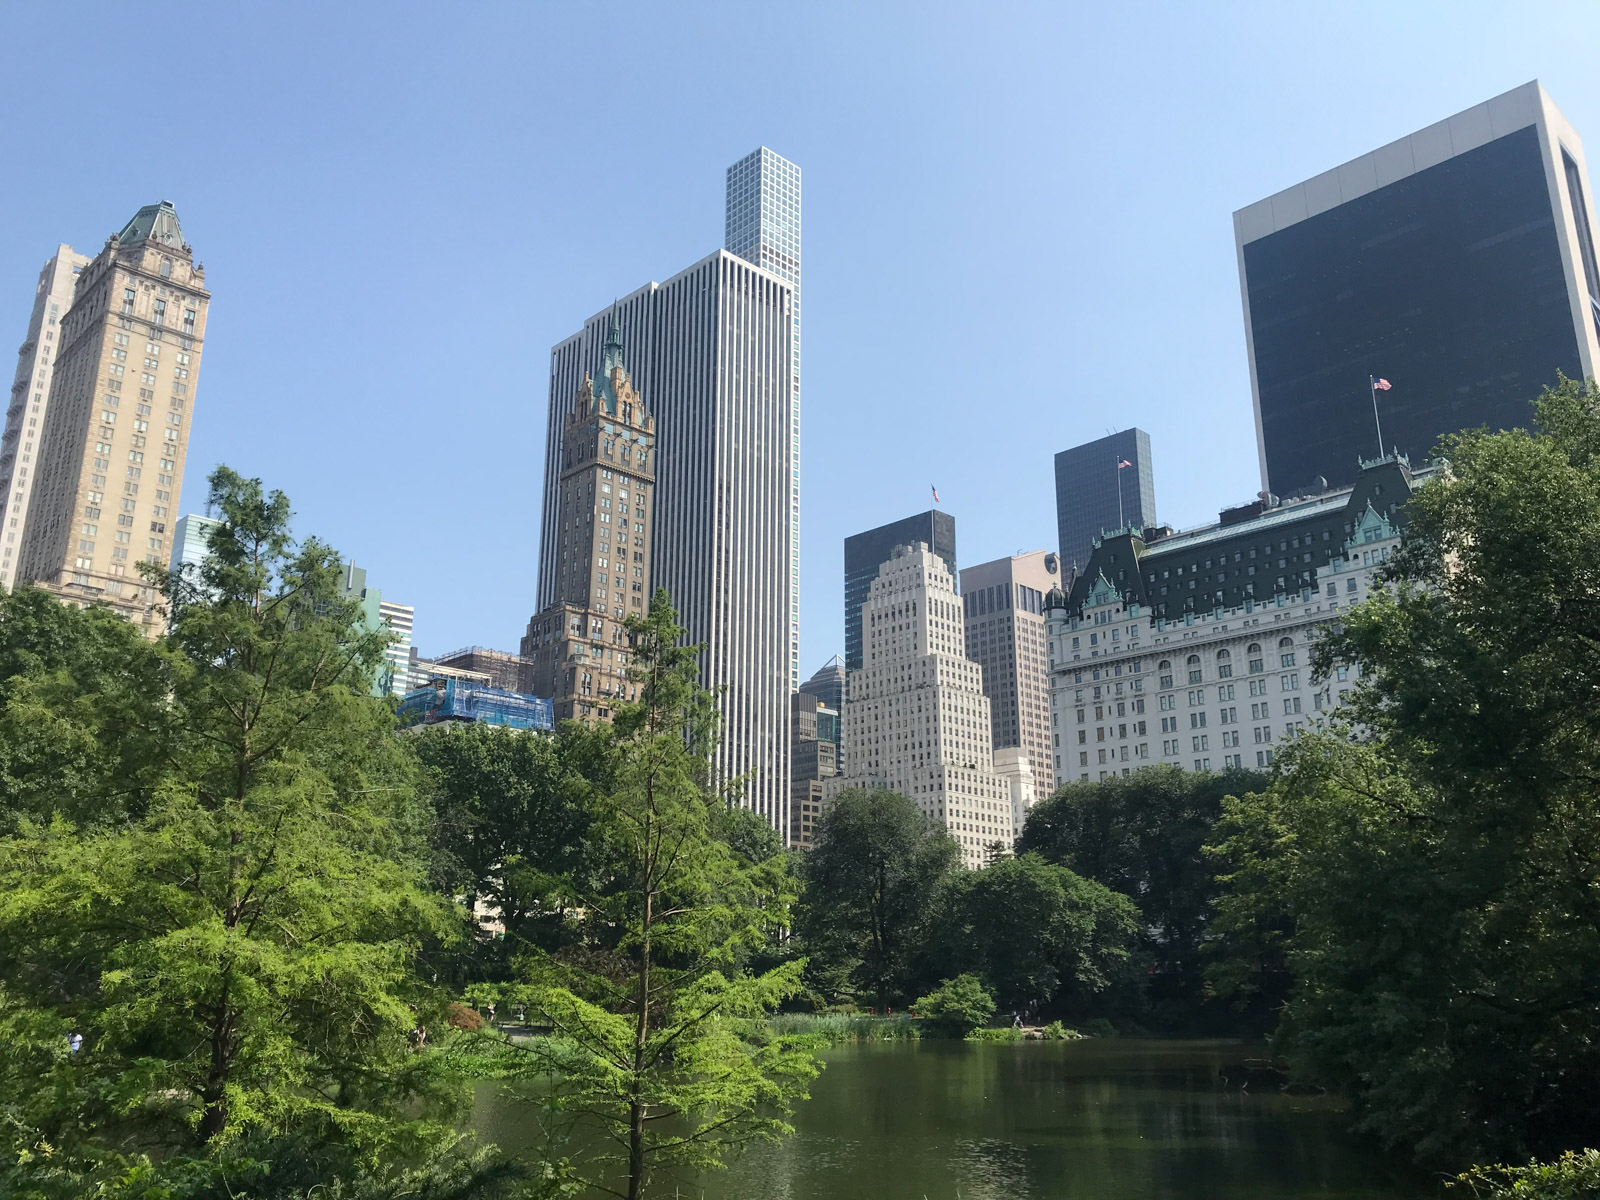 The view of the inside of a park, with lots of very green trees and a big lake. In the background behind the park’s bounds are skyscrapers